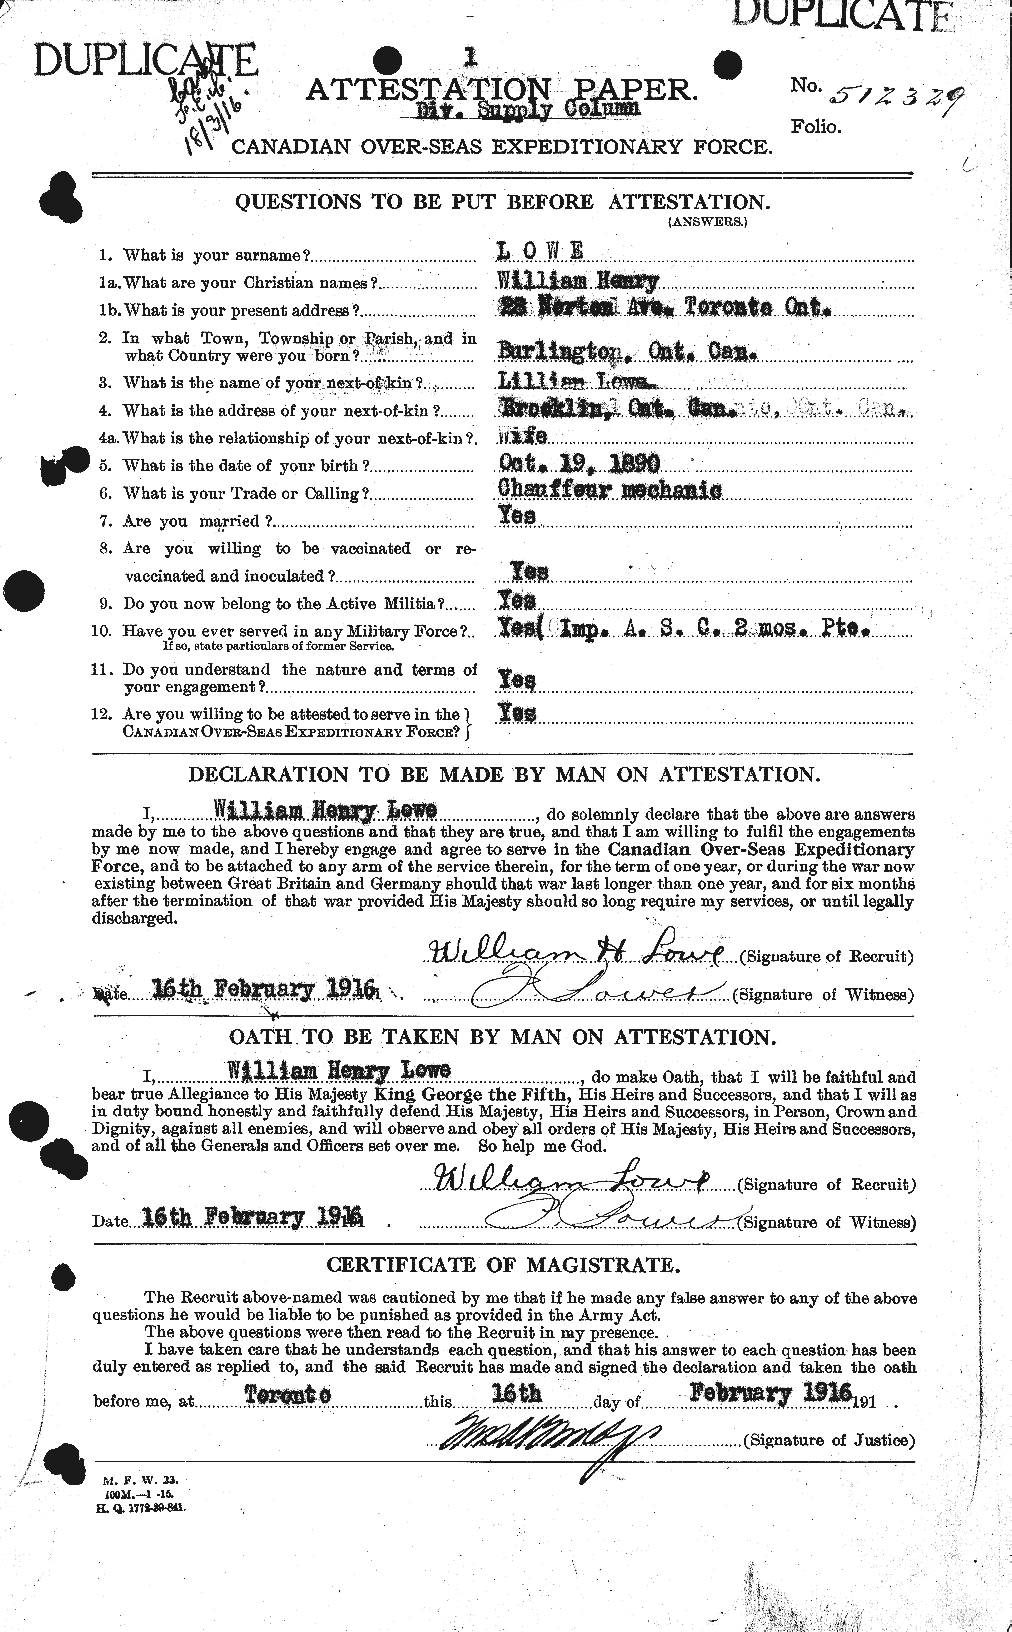 Personnel Records of the First World War - CEF 471231a